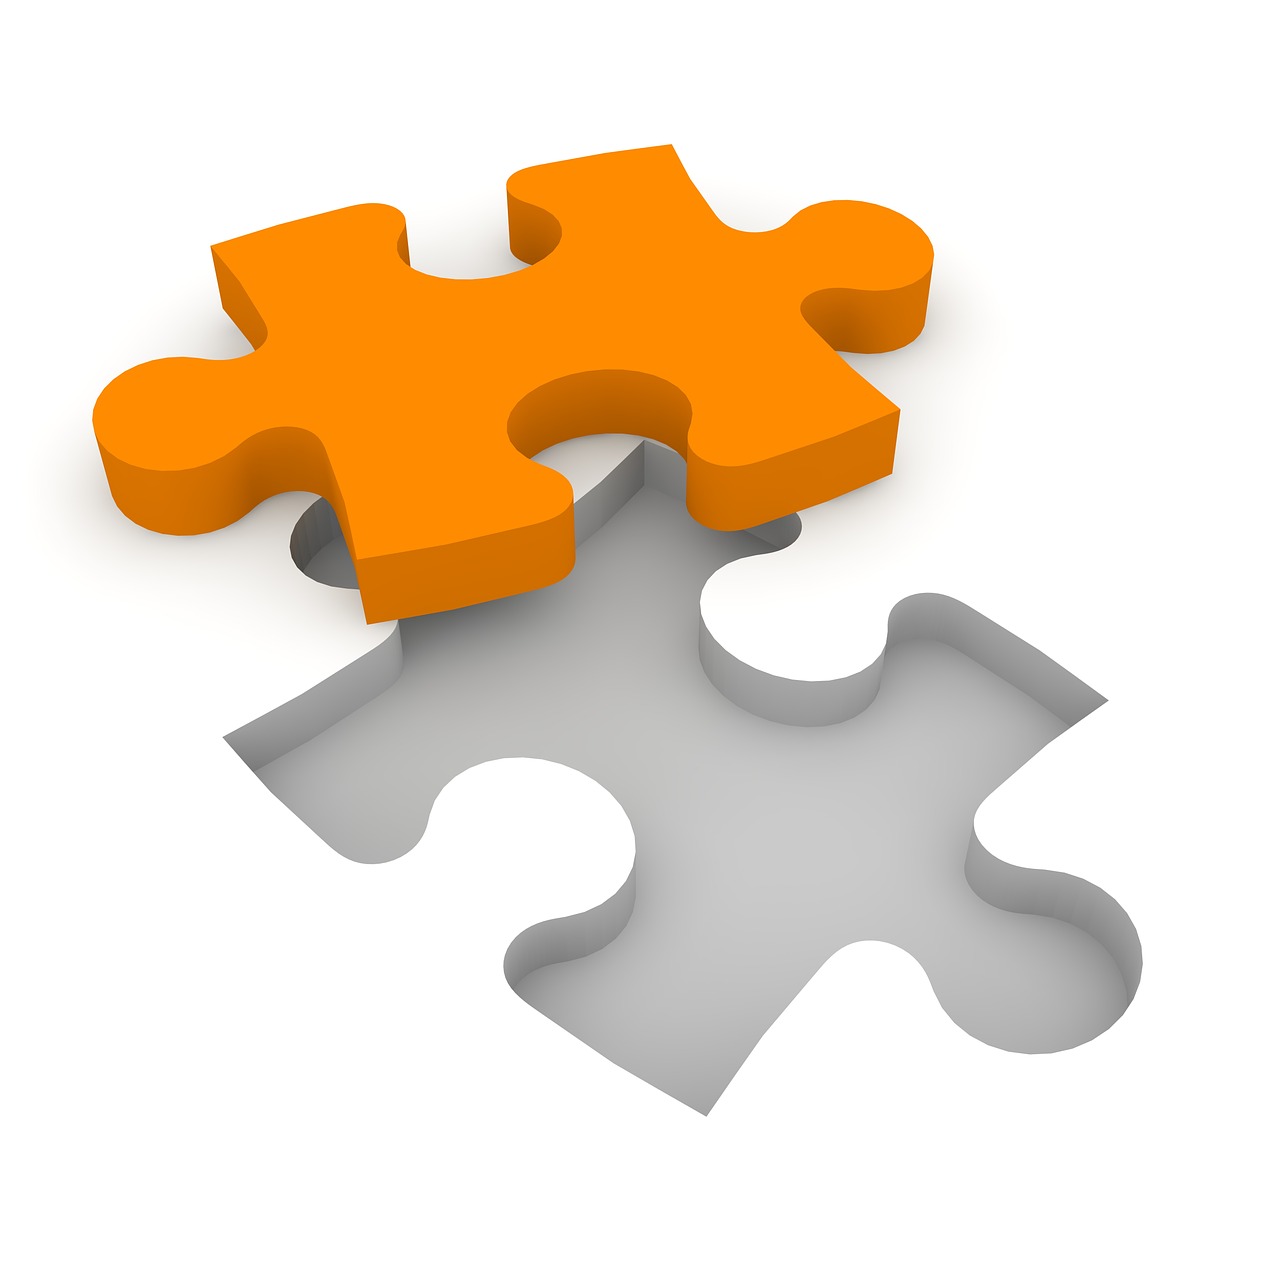 a couple of puzzle pieces sitting on top of each other, a jigsaw puzzle, by David Garner, orange grey white, rendering, an orange, where a large